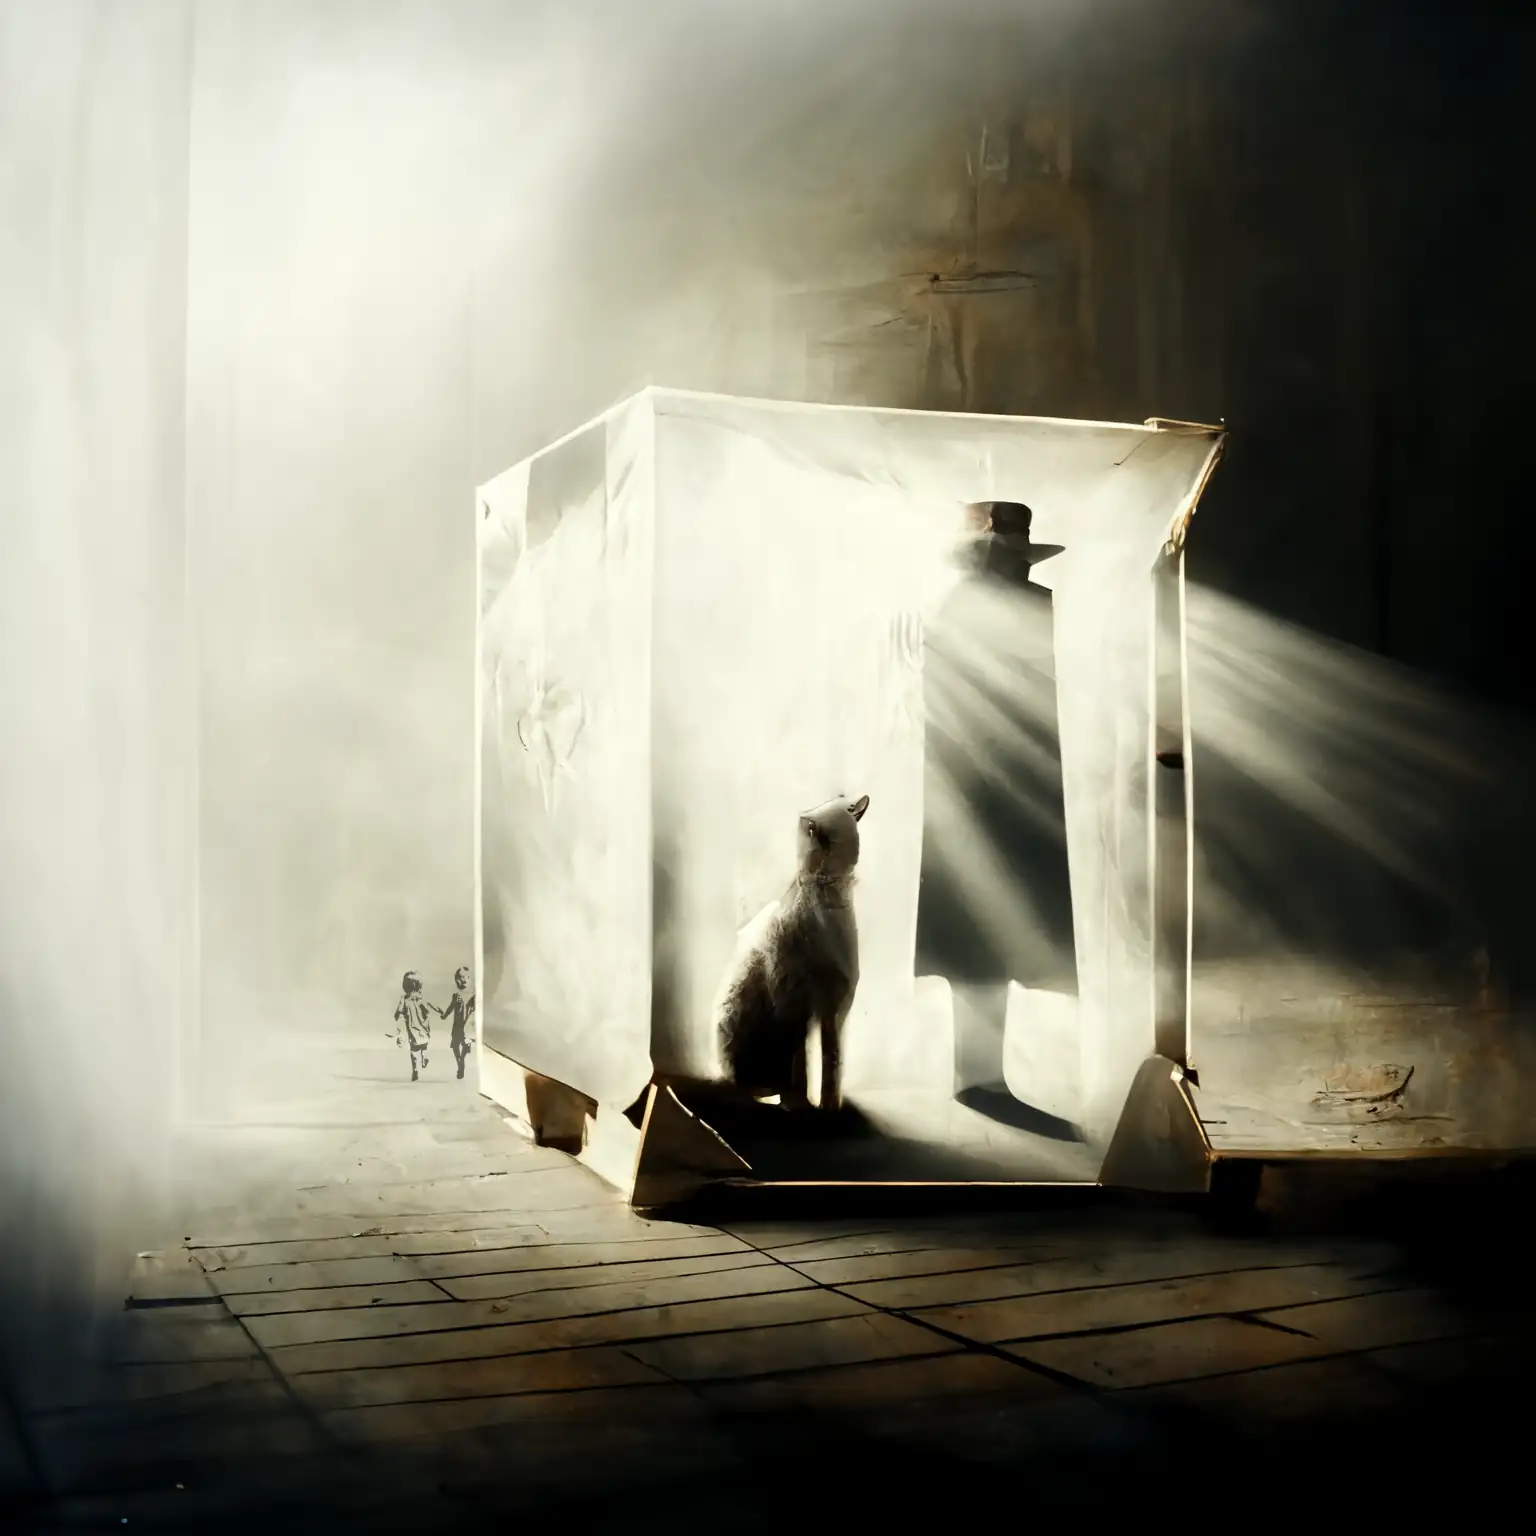 A large cat or dog is sitting behind a figure in a brimmed hat and long coat. They are both in a see through cube. The box of Schrödinger's cat. Sepia tones but with light rays coming from the top left corner. The cat is watching the kids from the logo walk away.